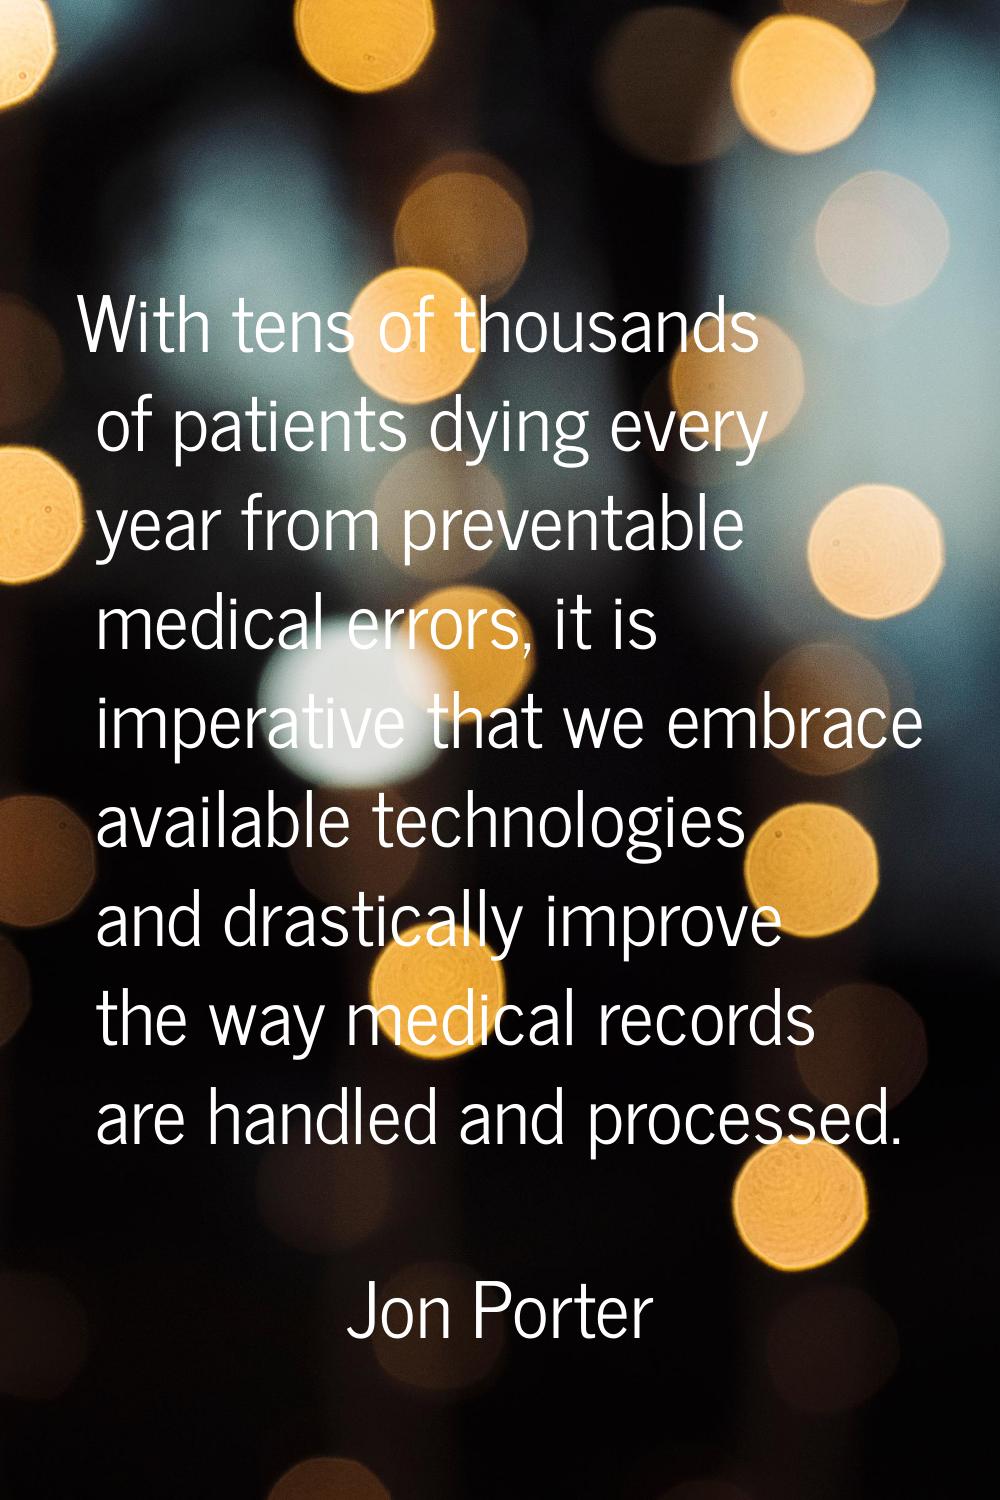 With tens of thousands of patients dying every year from preventable medical errors, it is imperati